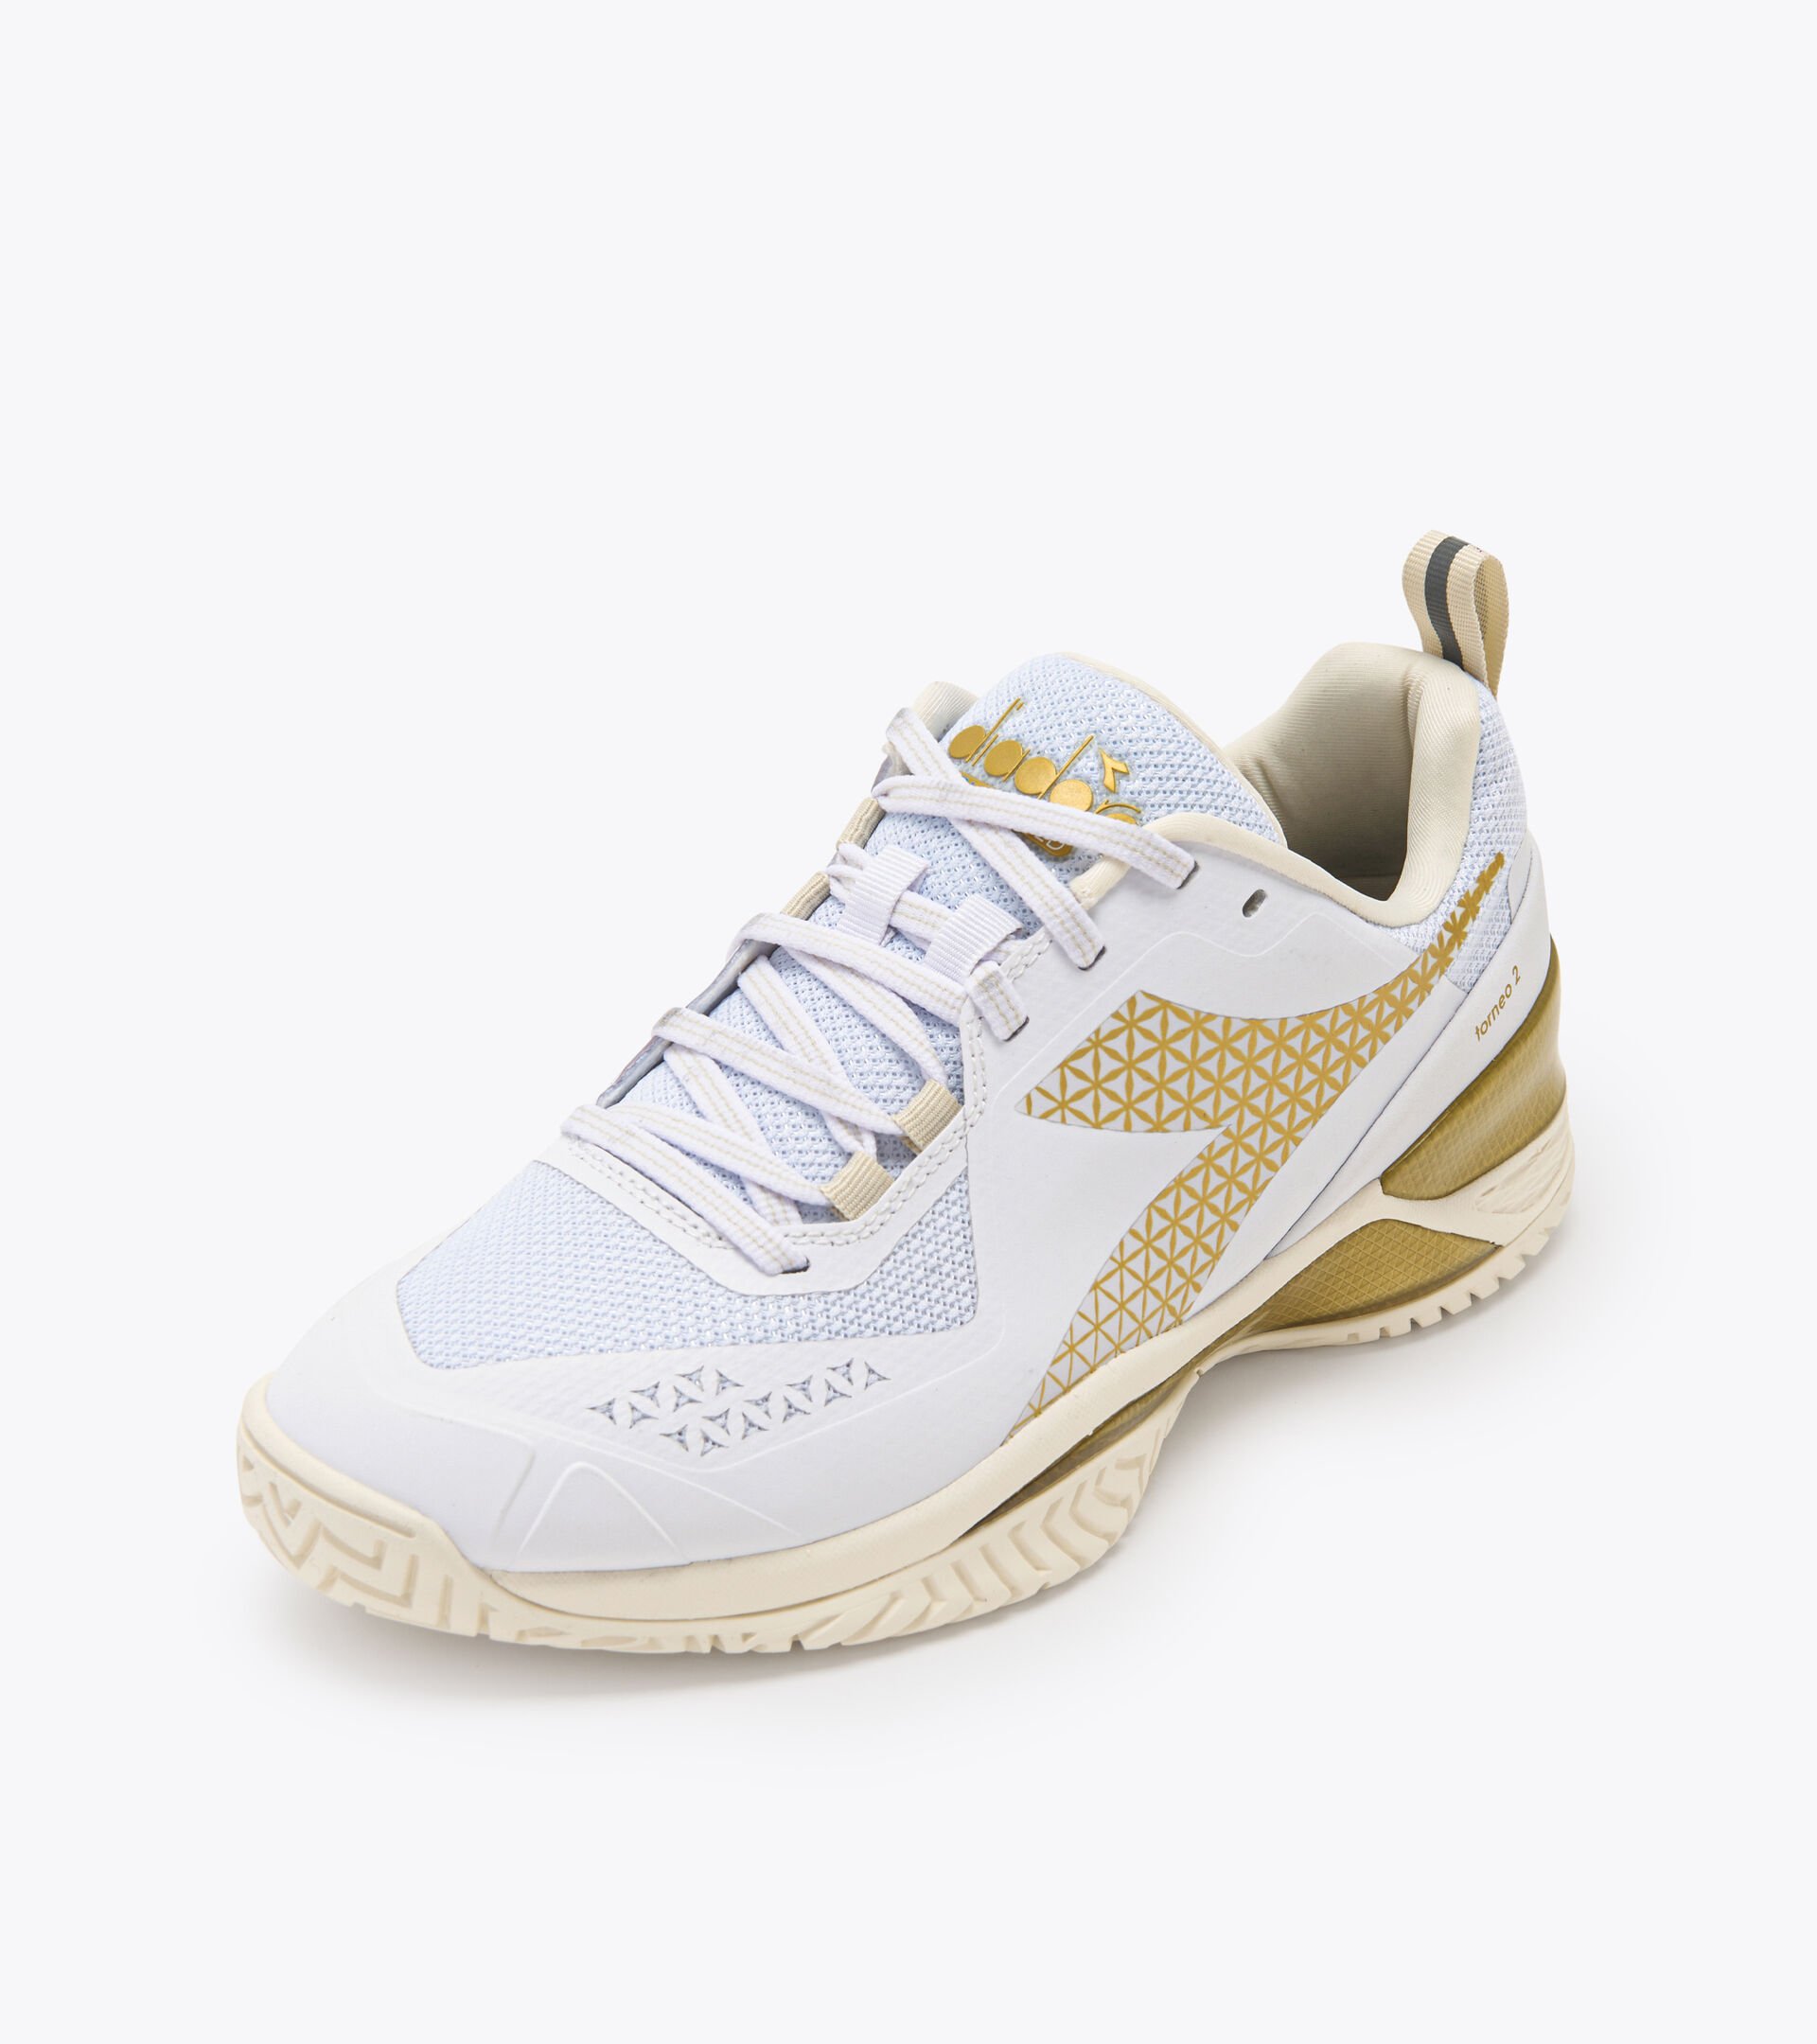 BLUSHIELD TORNEO 2 W AG Tennis shoes for hard surfaces or clay courts -  Women - Diadora Online Store US